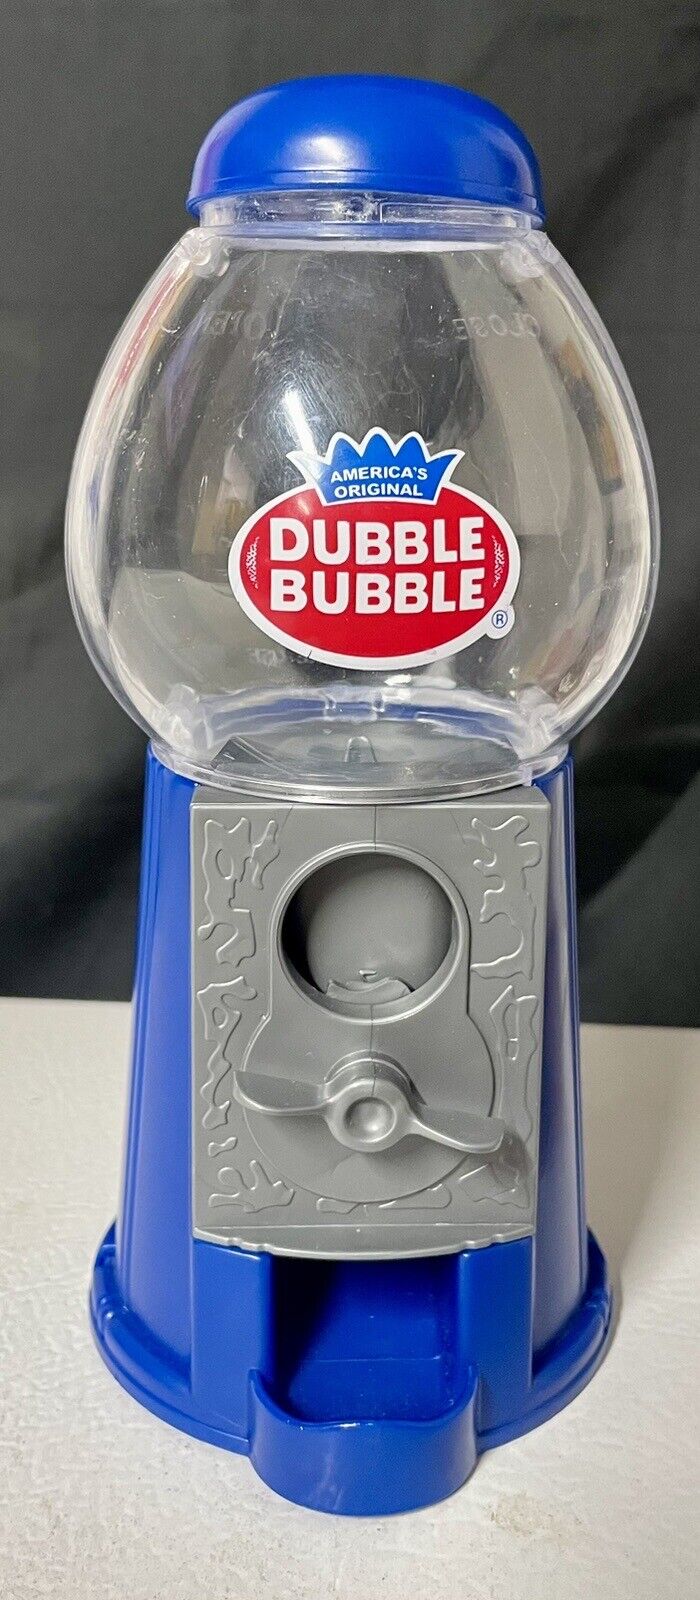 Blue 7” colorful classic dubble bubble, gumball machine Coin, Bank And Dispenser